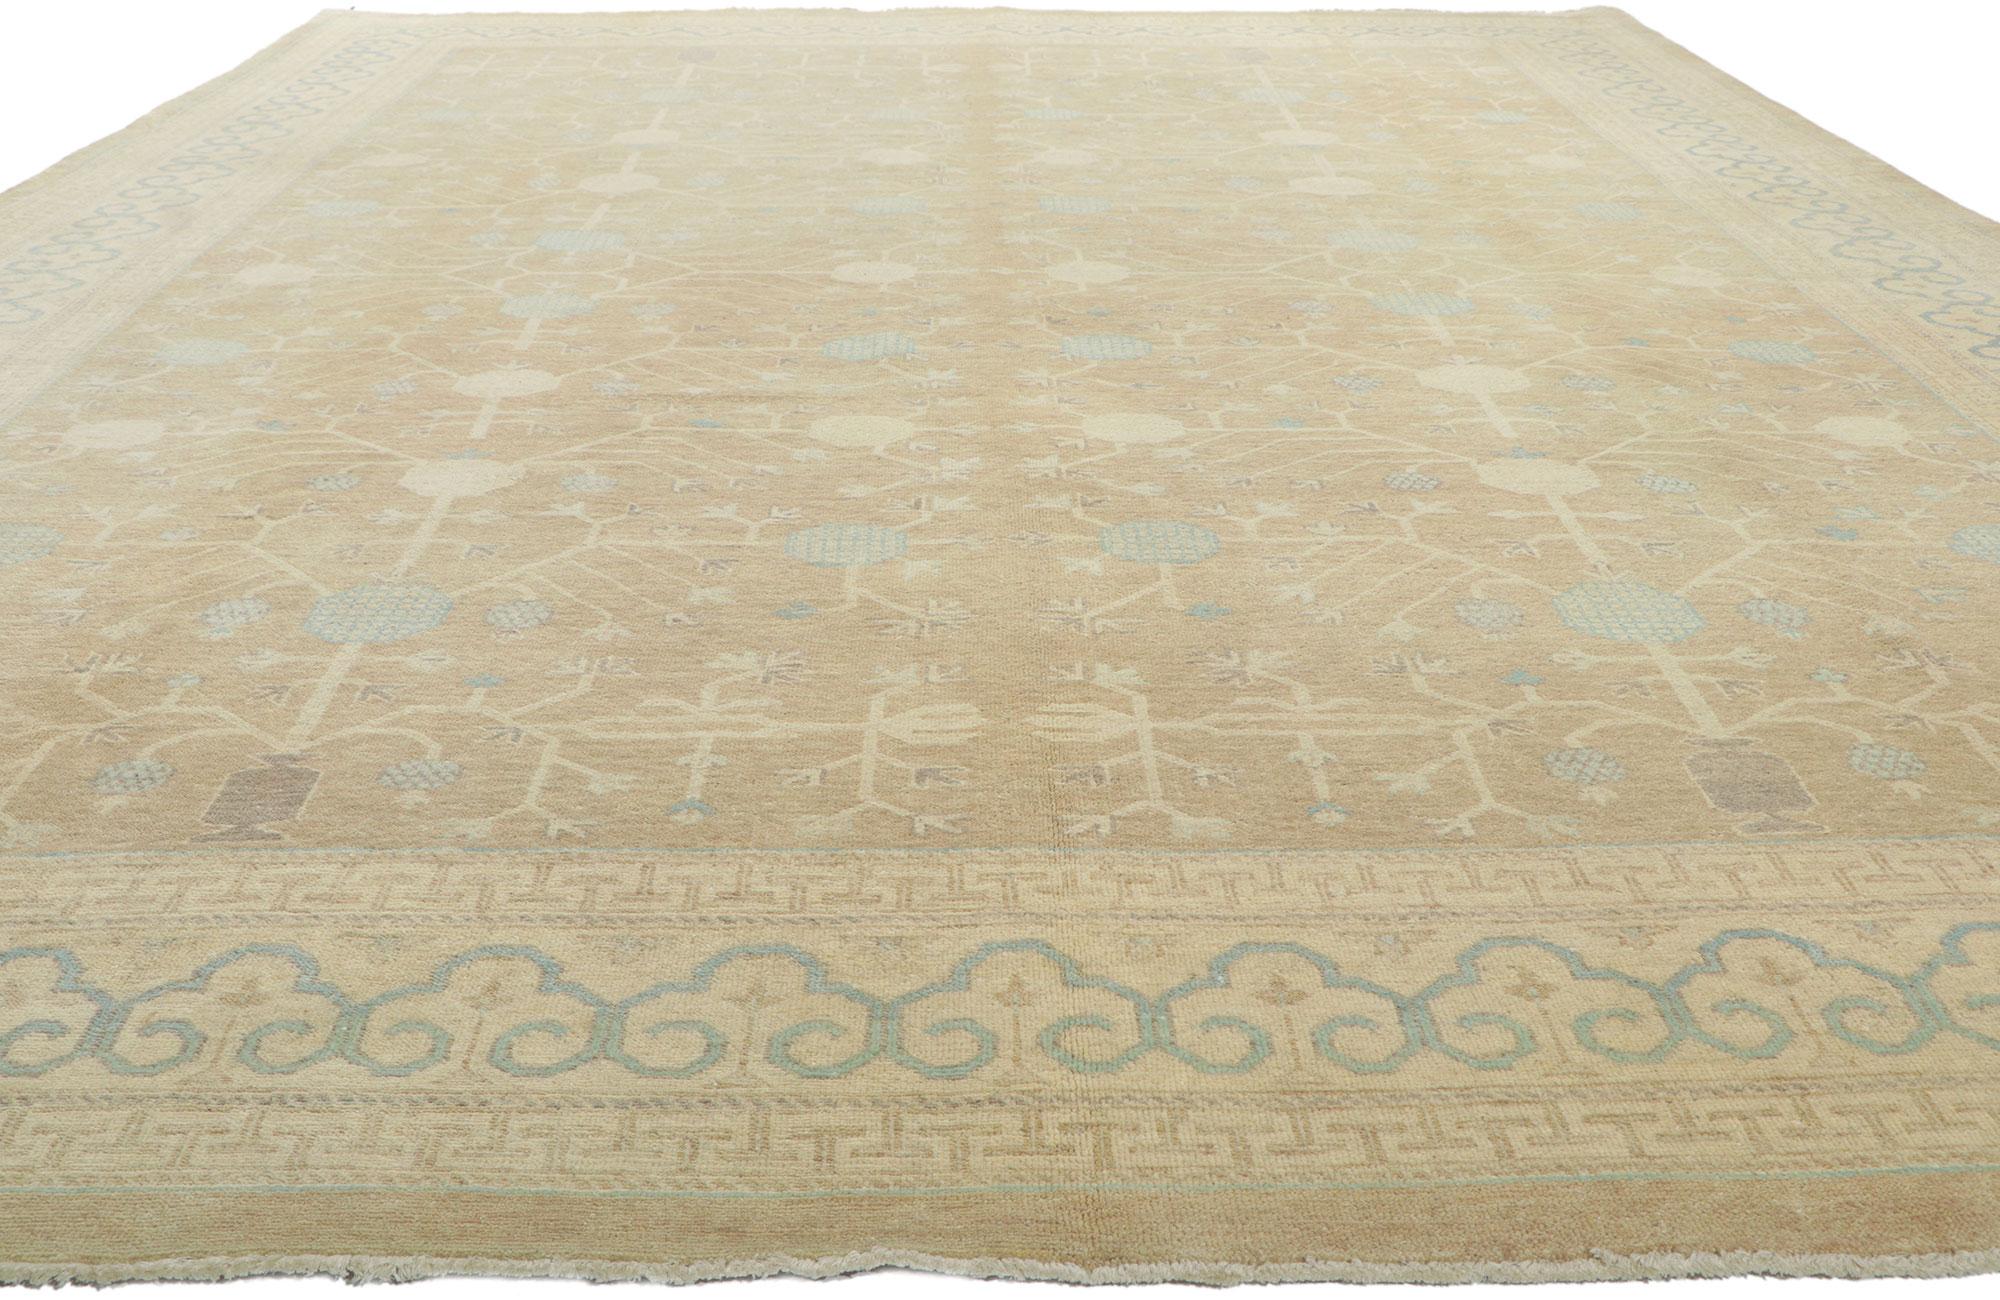 New Transitional Khotan Rug with Soft Earth-Tone Colors For Sale 3